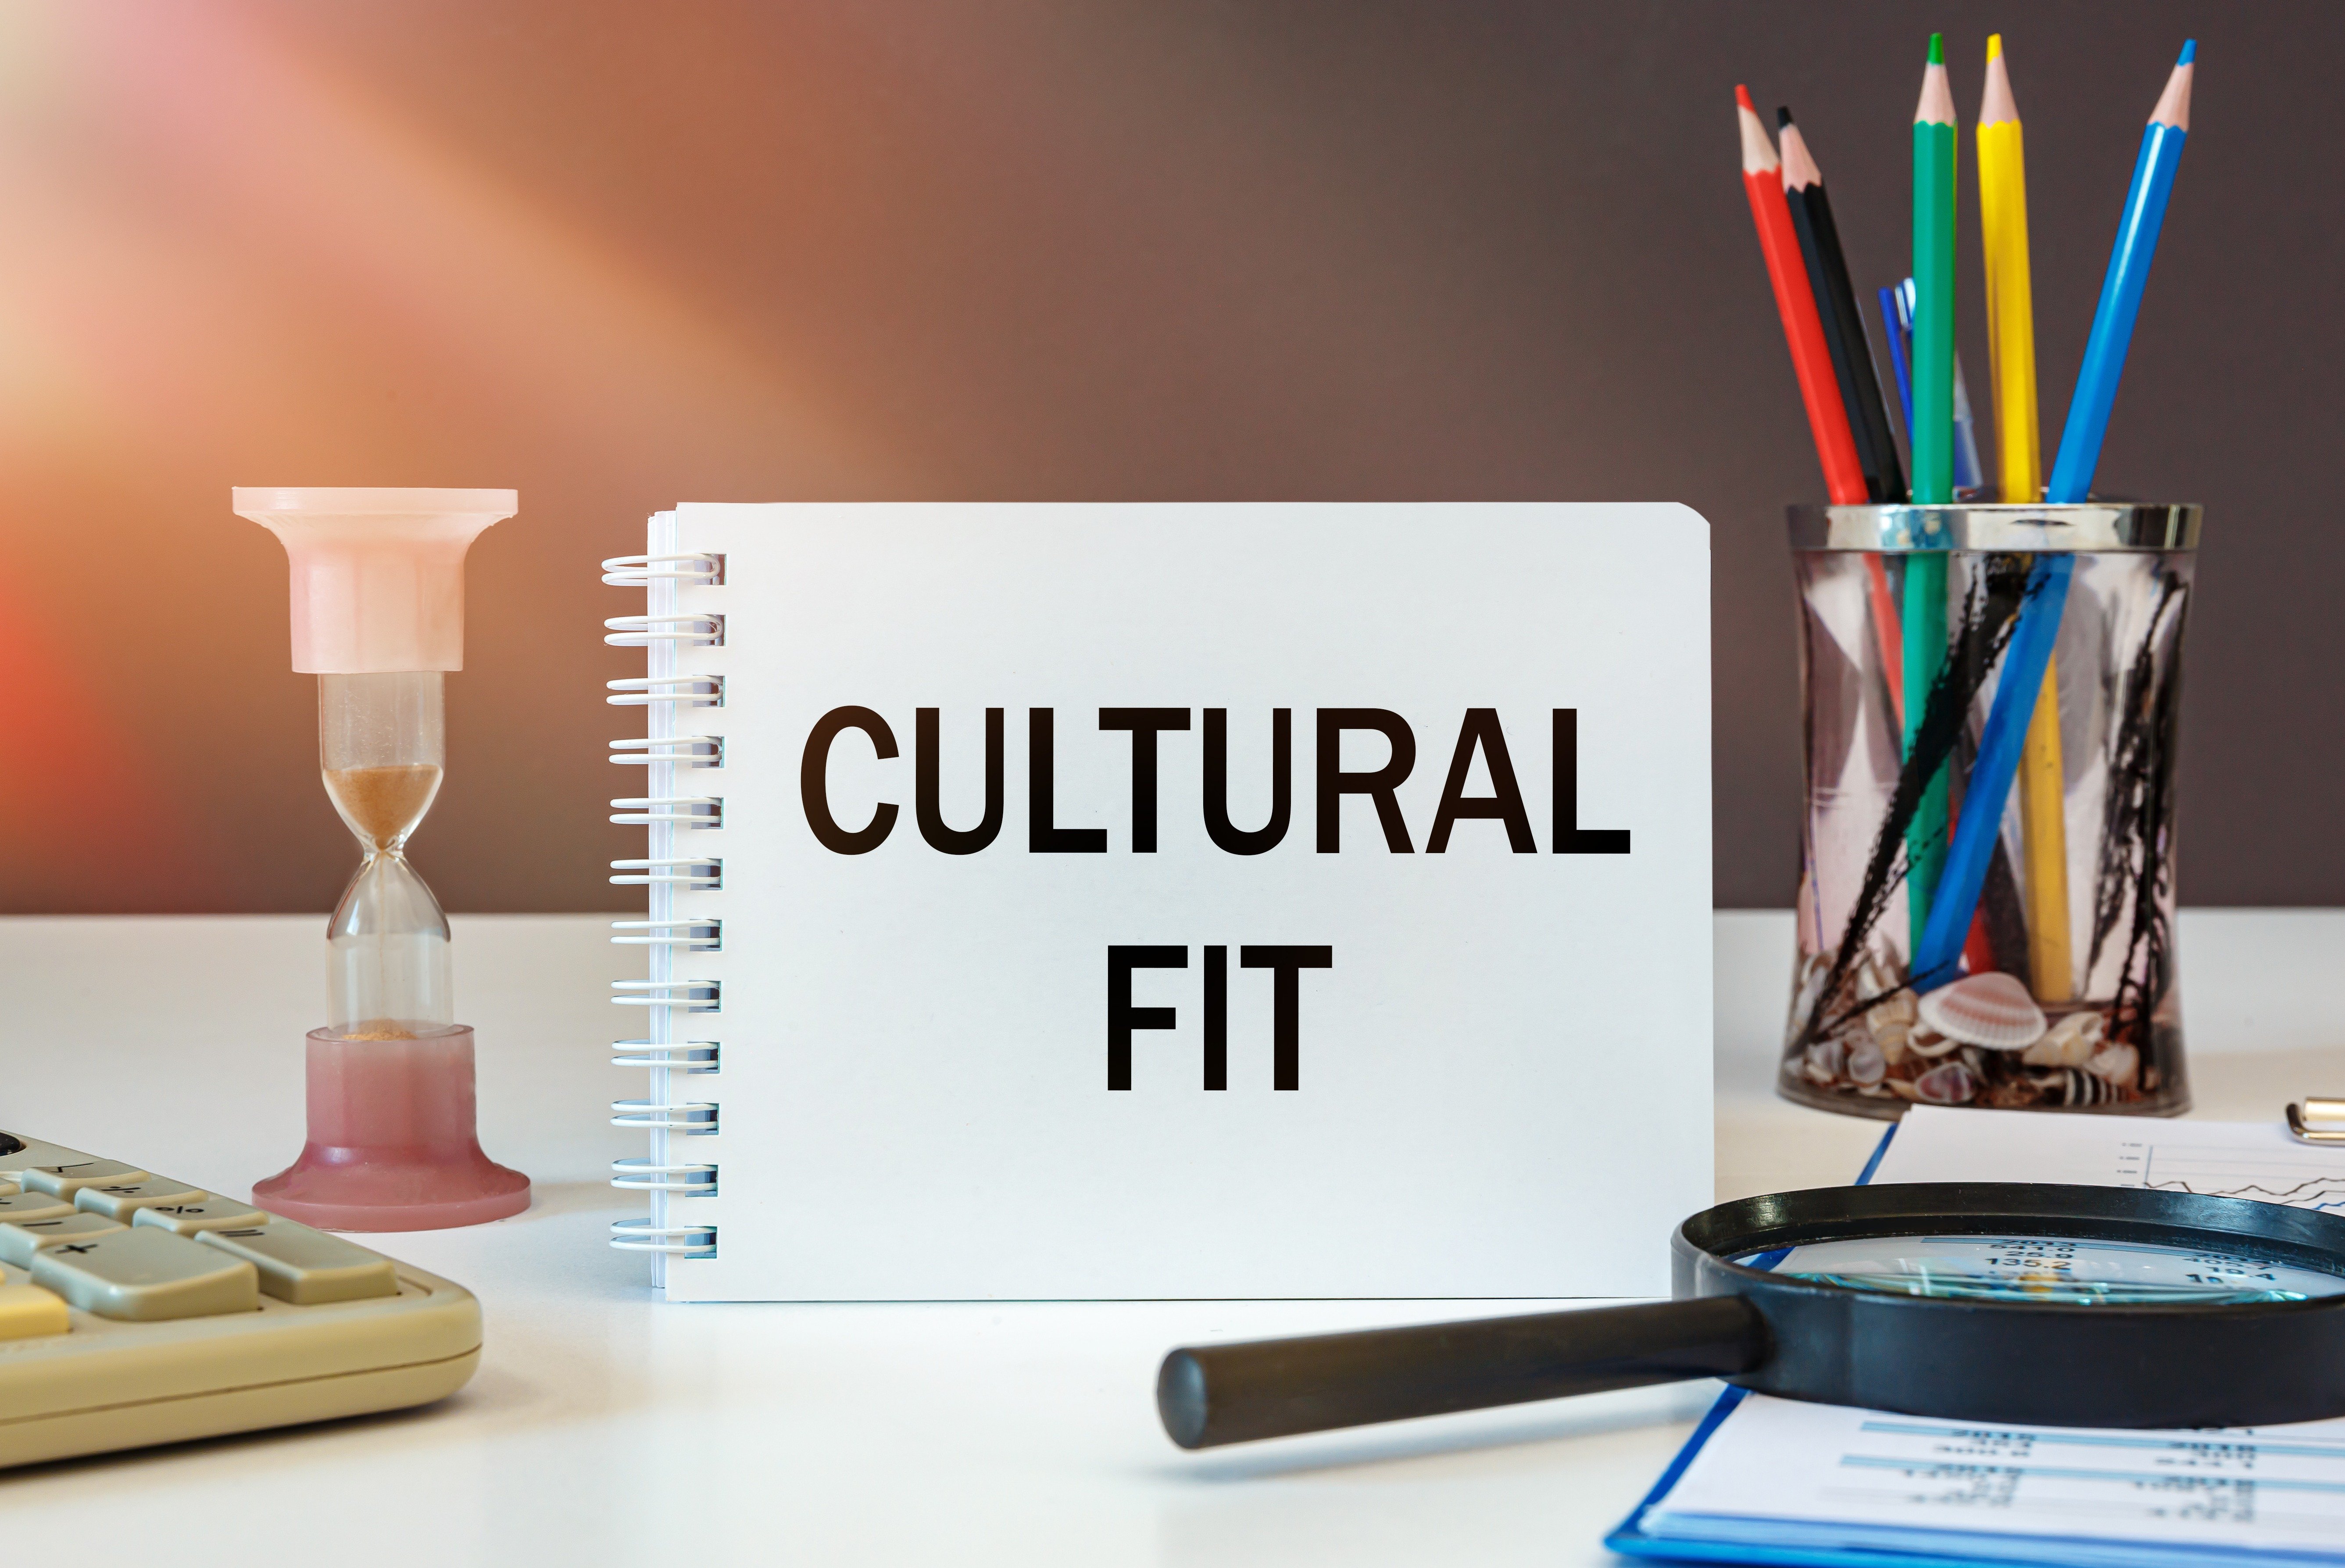 How to Hire Employees That Fit Your Company Culture